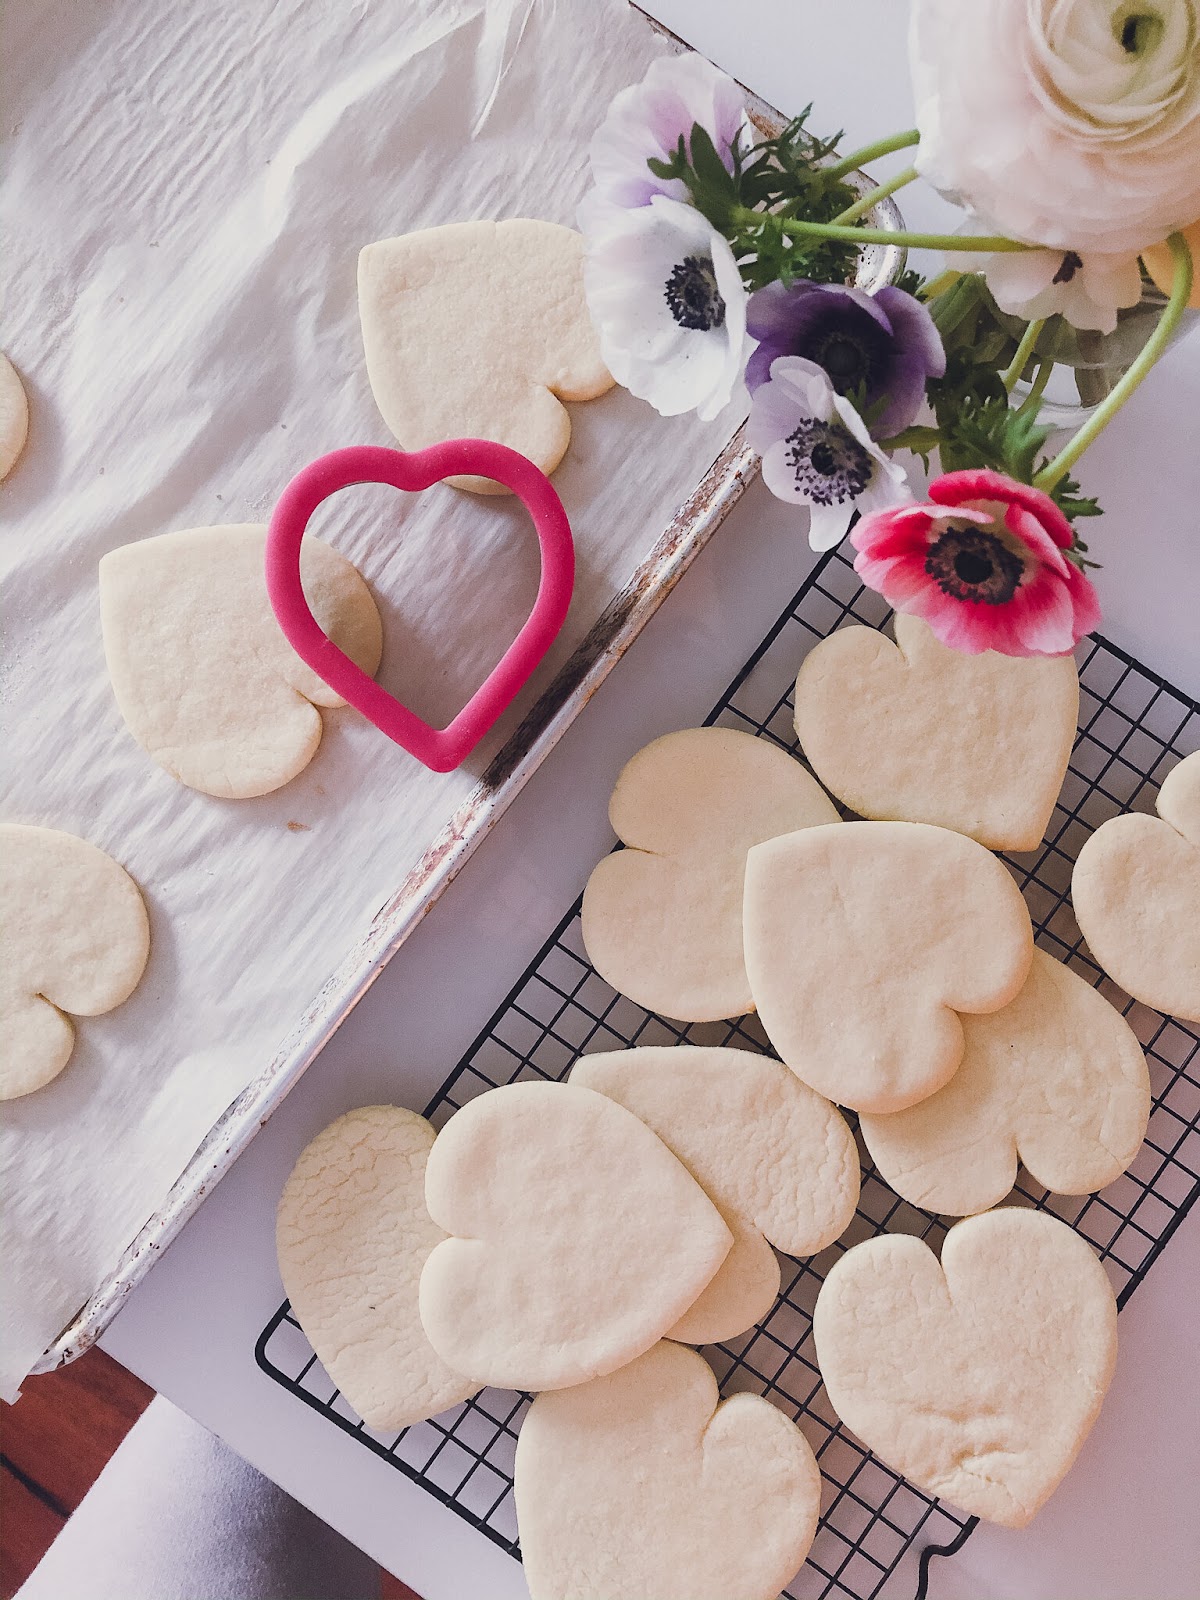 heart-shaped-sugar-cookies-lily-muffins.jpg